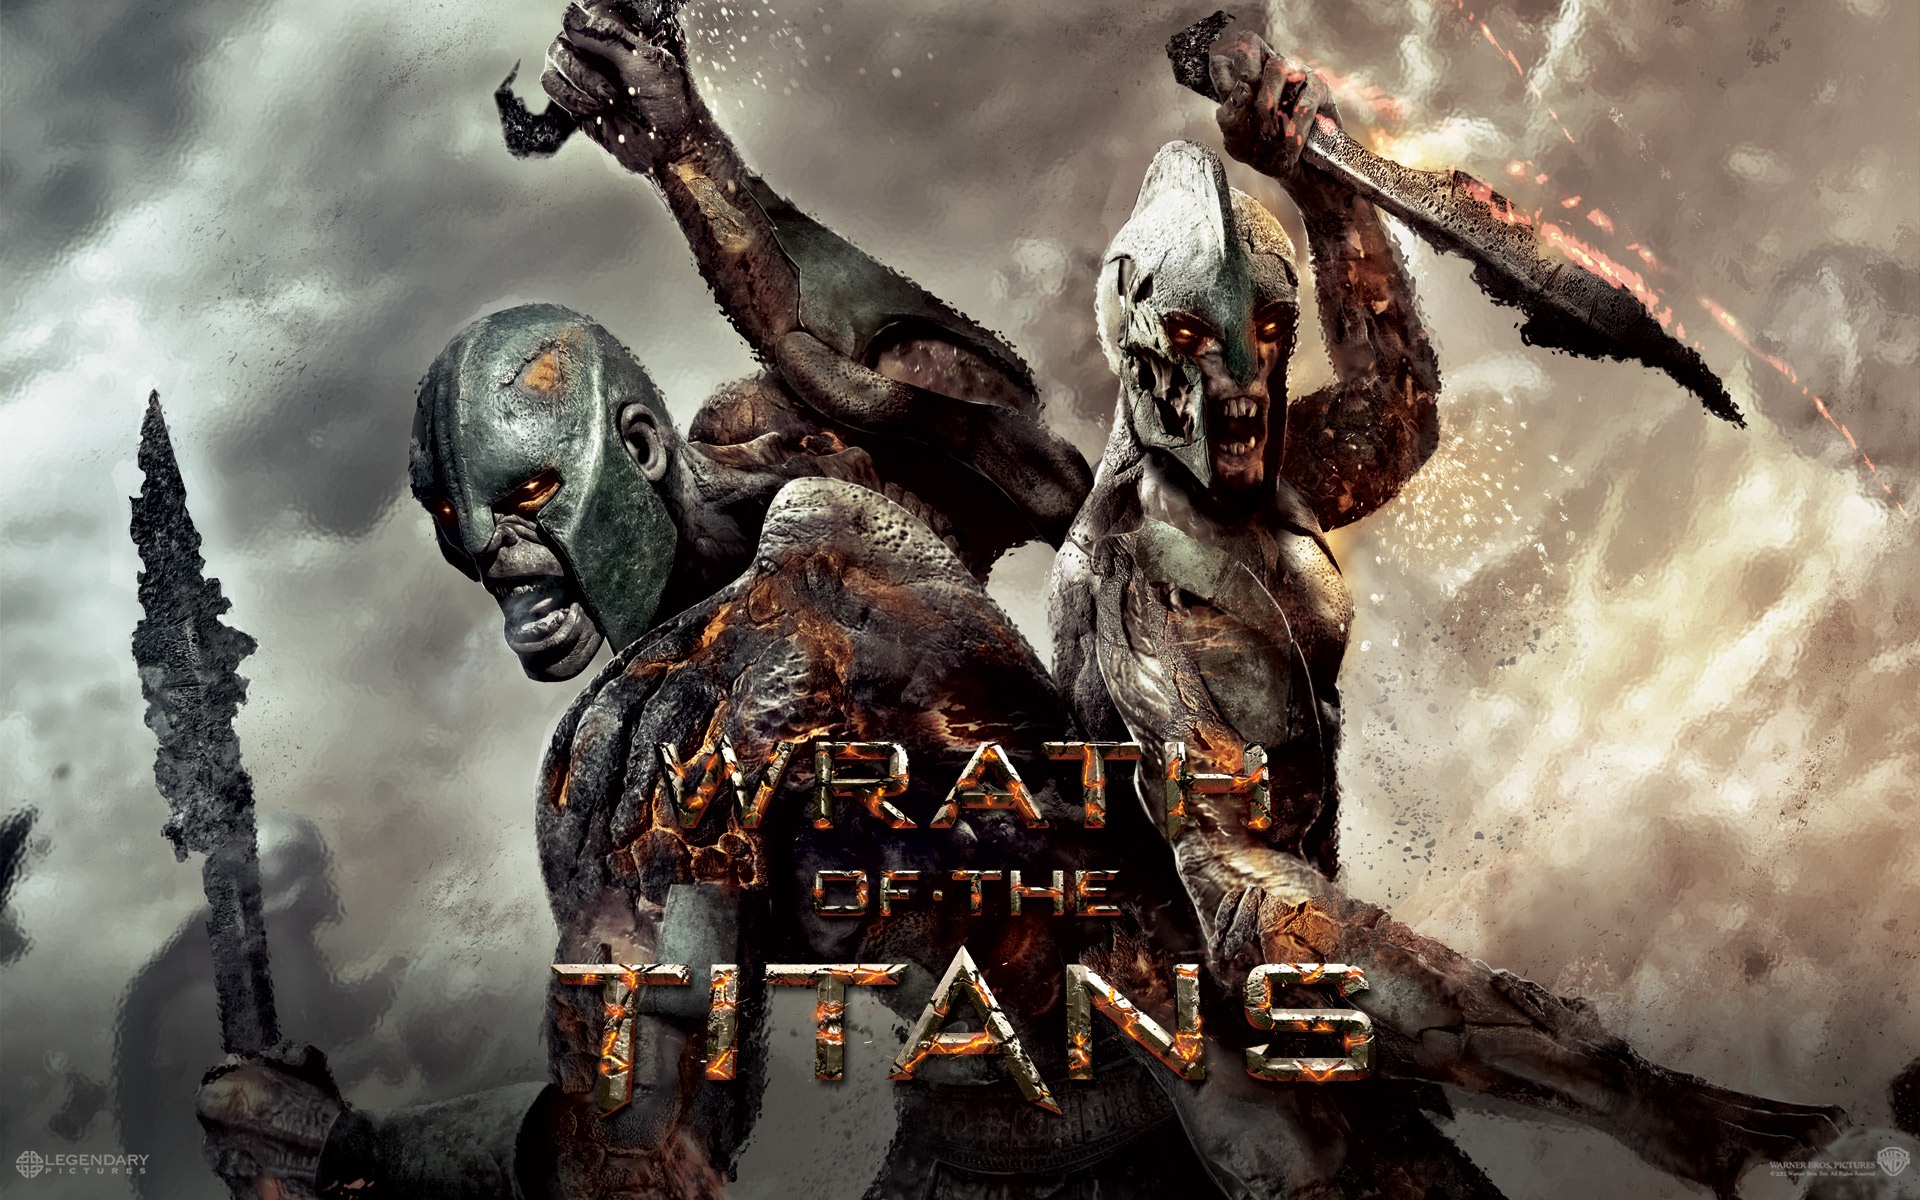 Wrath of the Titans HD wallpapers #6 - 1920x1200